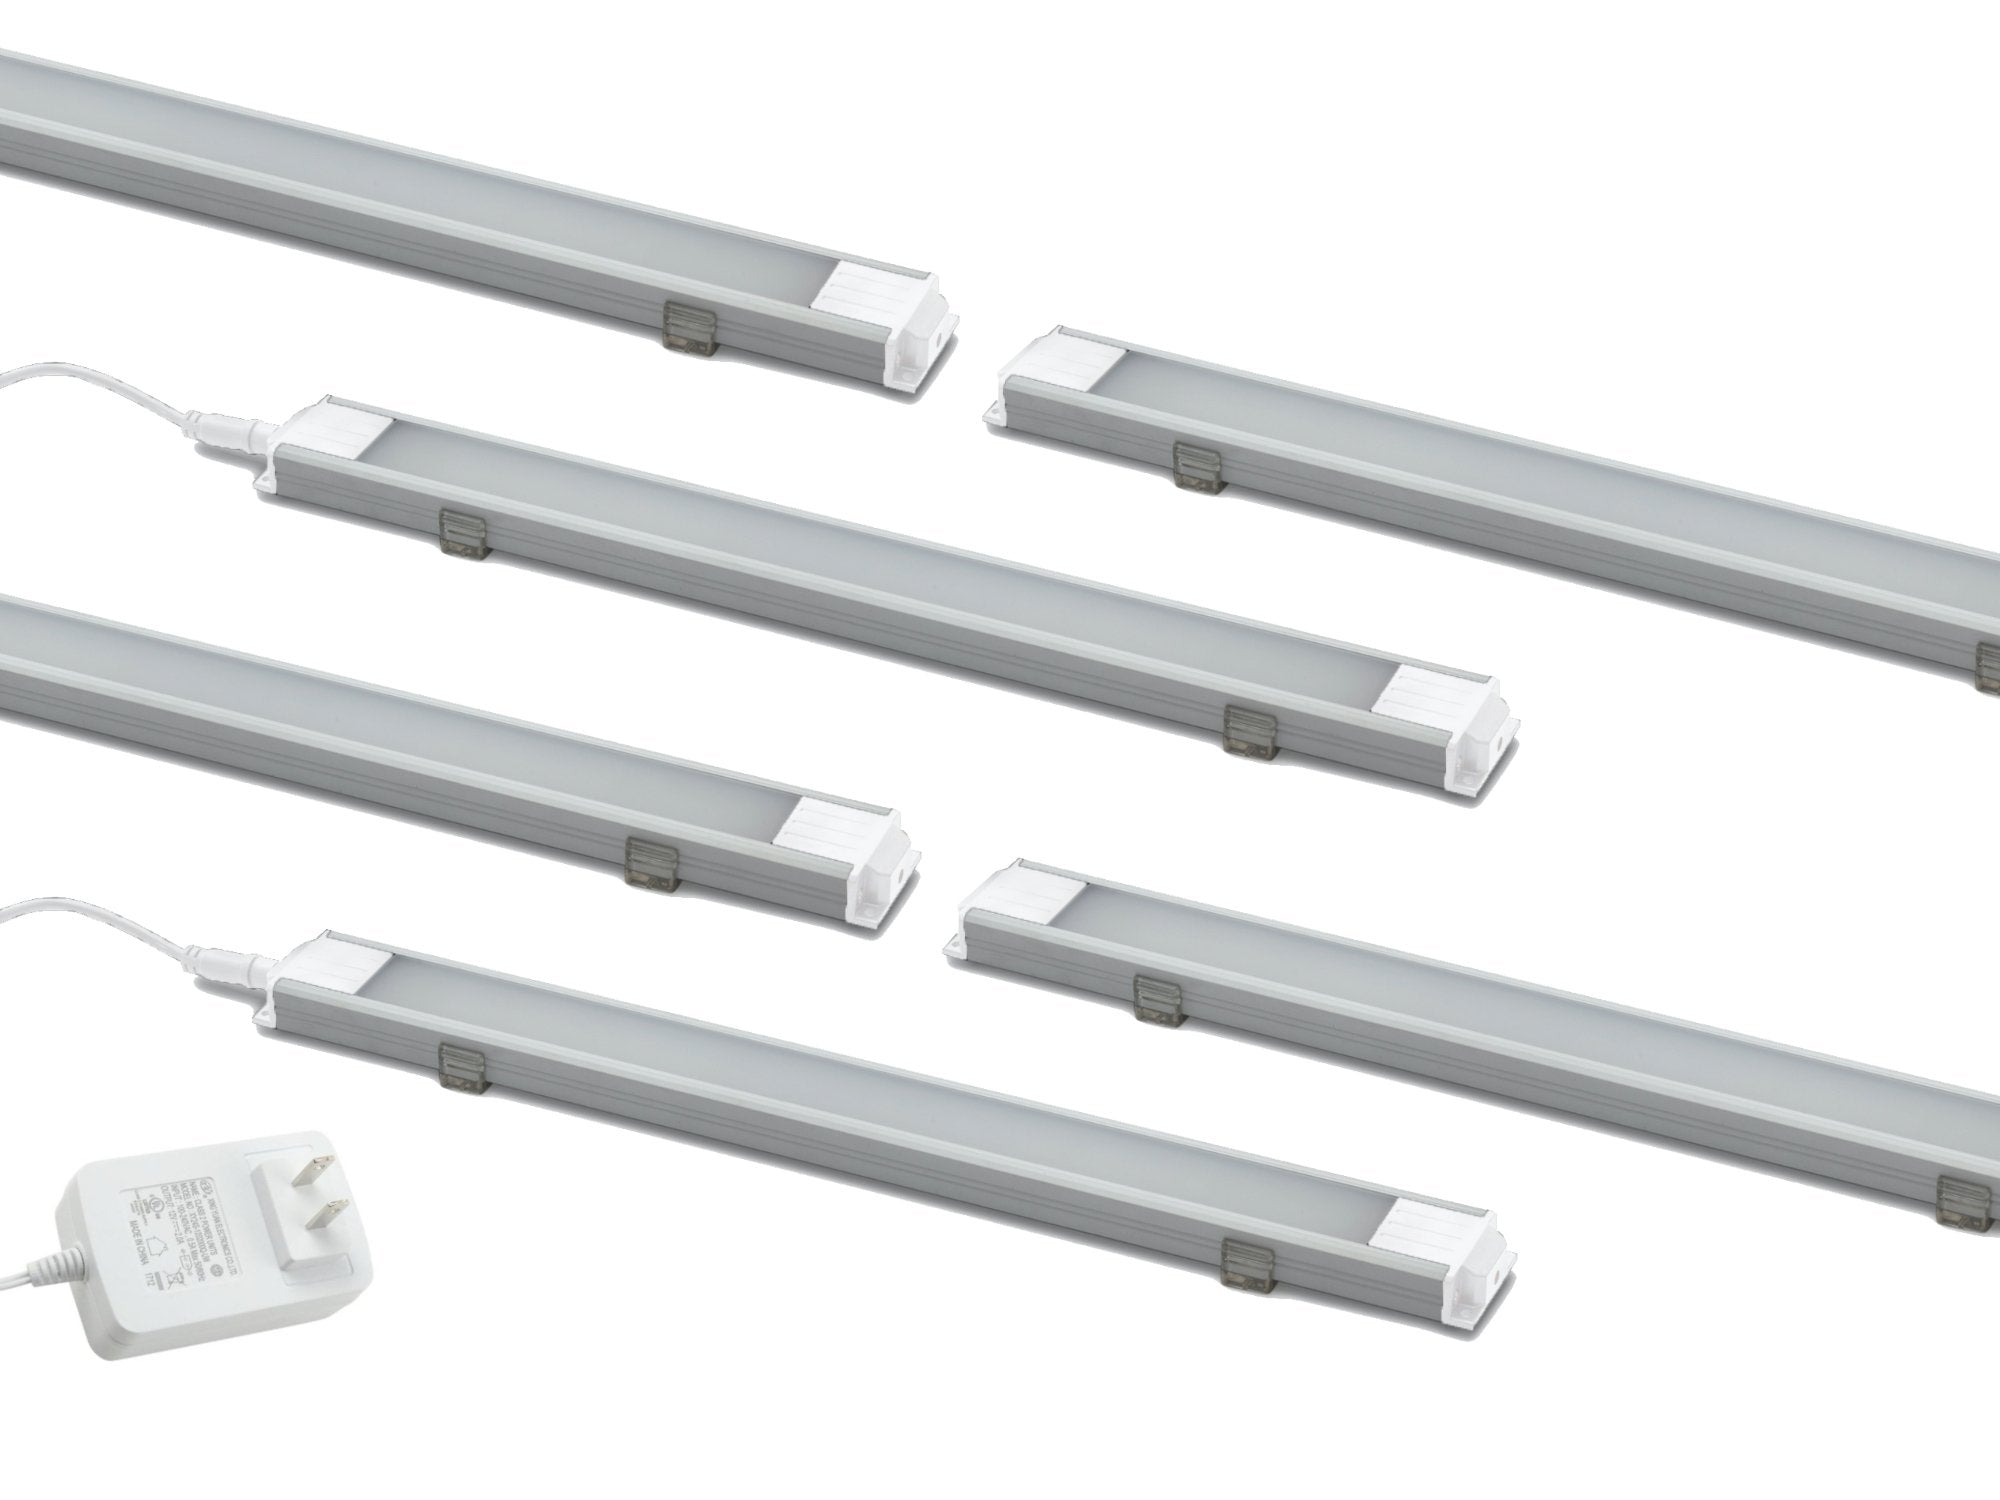 LED Display Lights (2 x Light Adapters, 4 x Light Extensions)